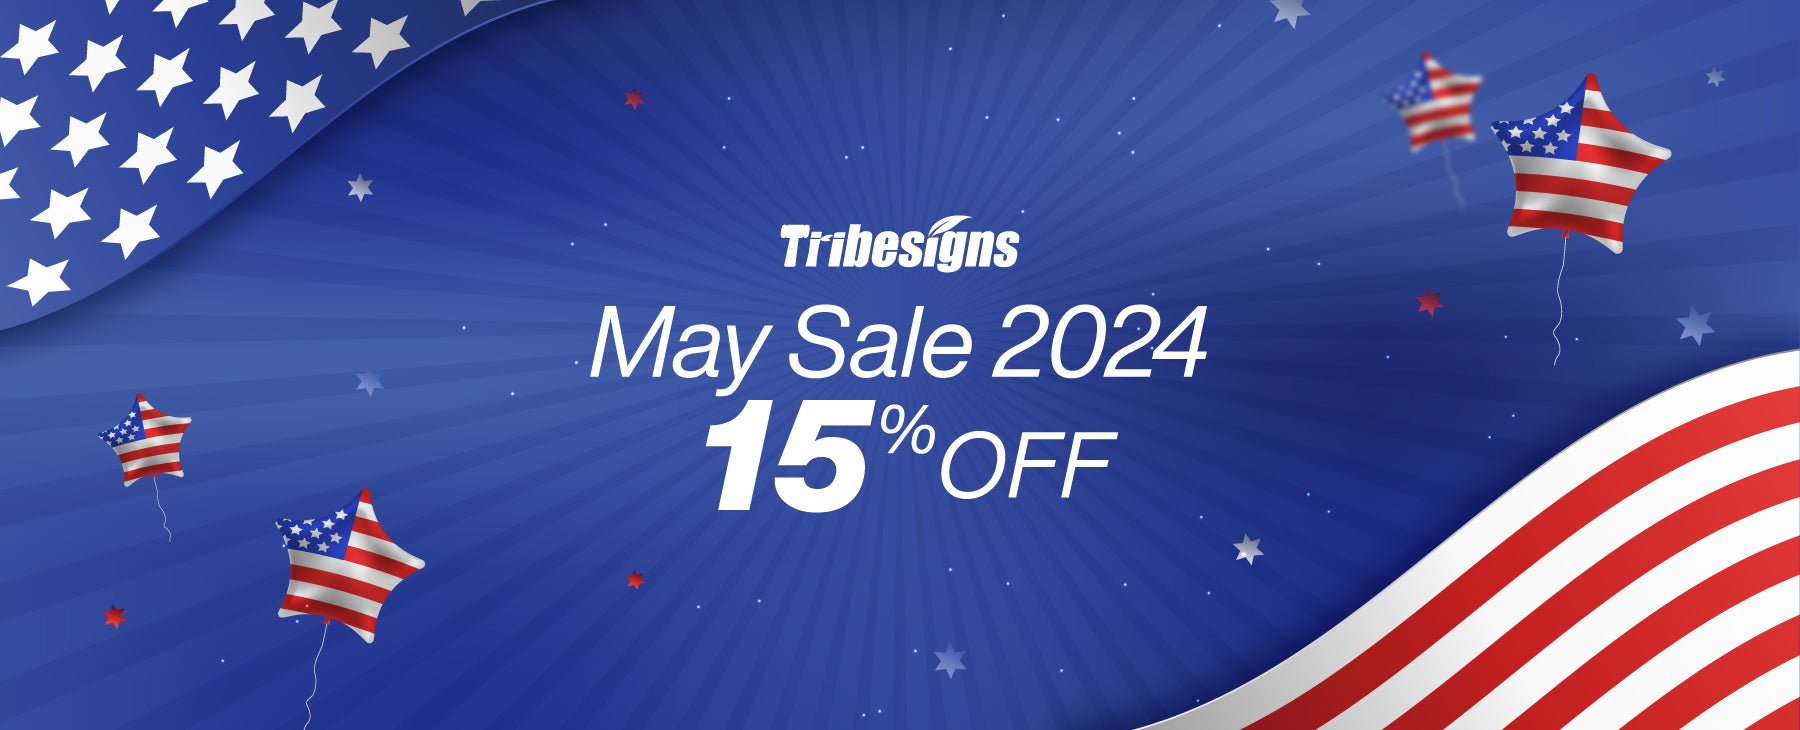 Revitalize Your Spaces with Tribesigns May Sale 2024 - Tribesigns